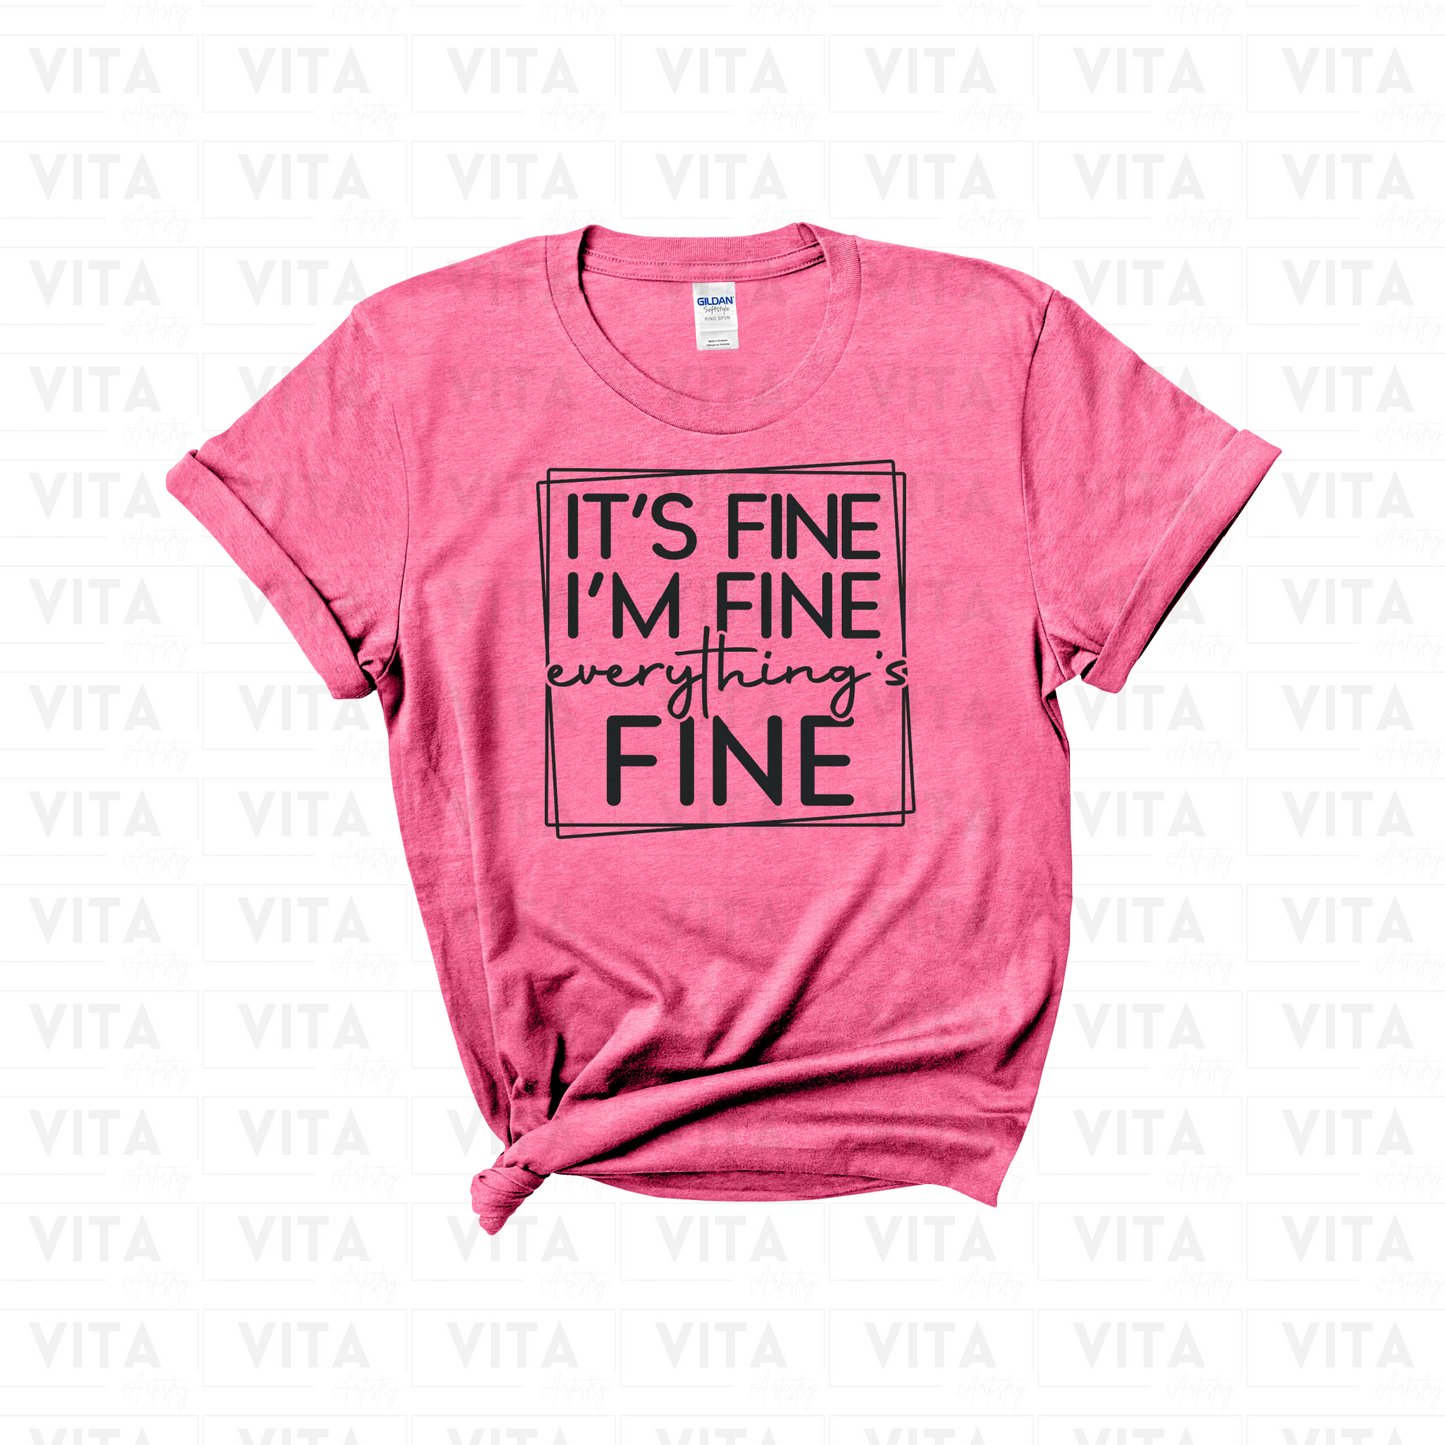 It's Fine I'm Fine Everything's Fine - Sarcastic Soft Style T-Shirt (Choose your shirt color)